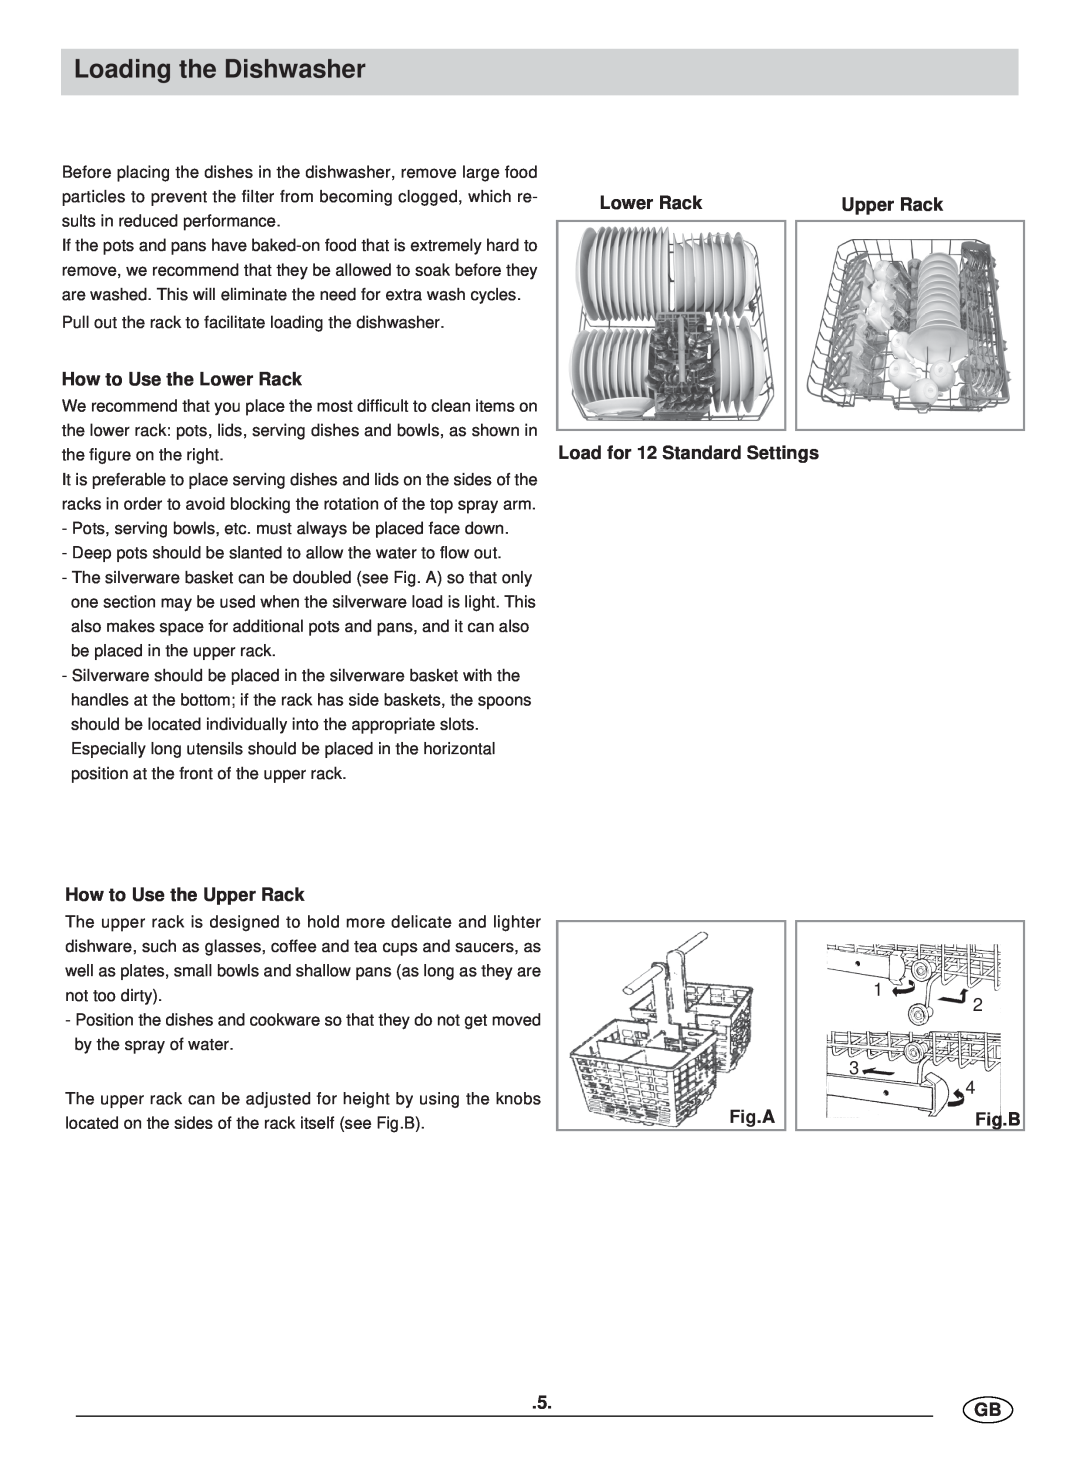 Haier DW12-BFE Loading the Dishwasher, How to Use the Lower Rack, How to Use the Upper Rack, Fig.A, Fig.B, 5.GB 